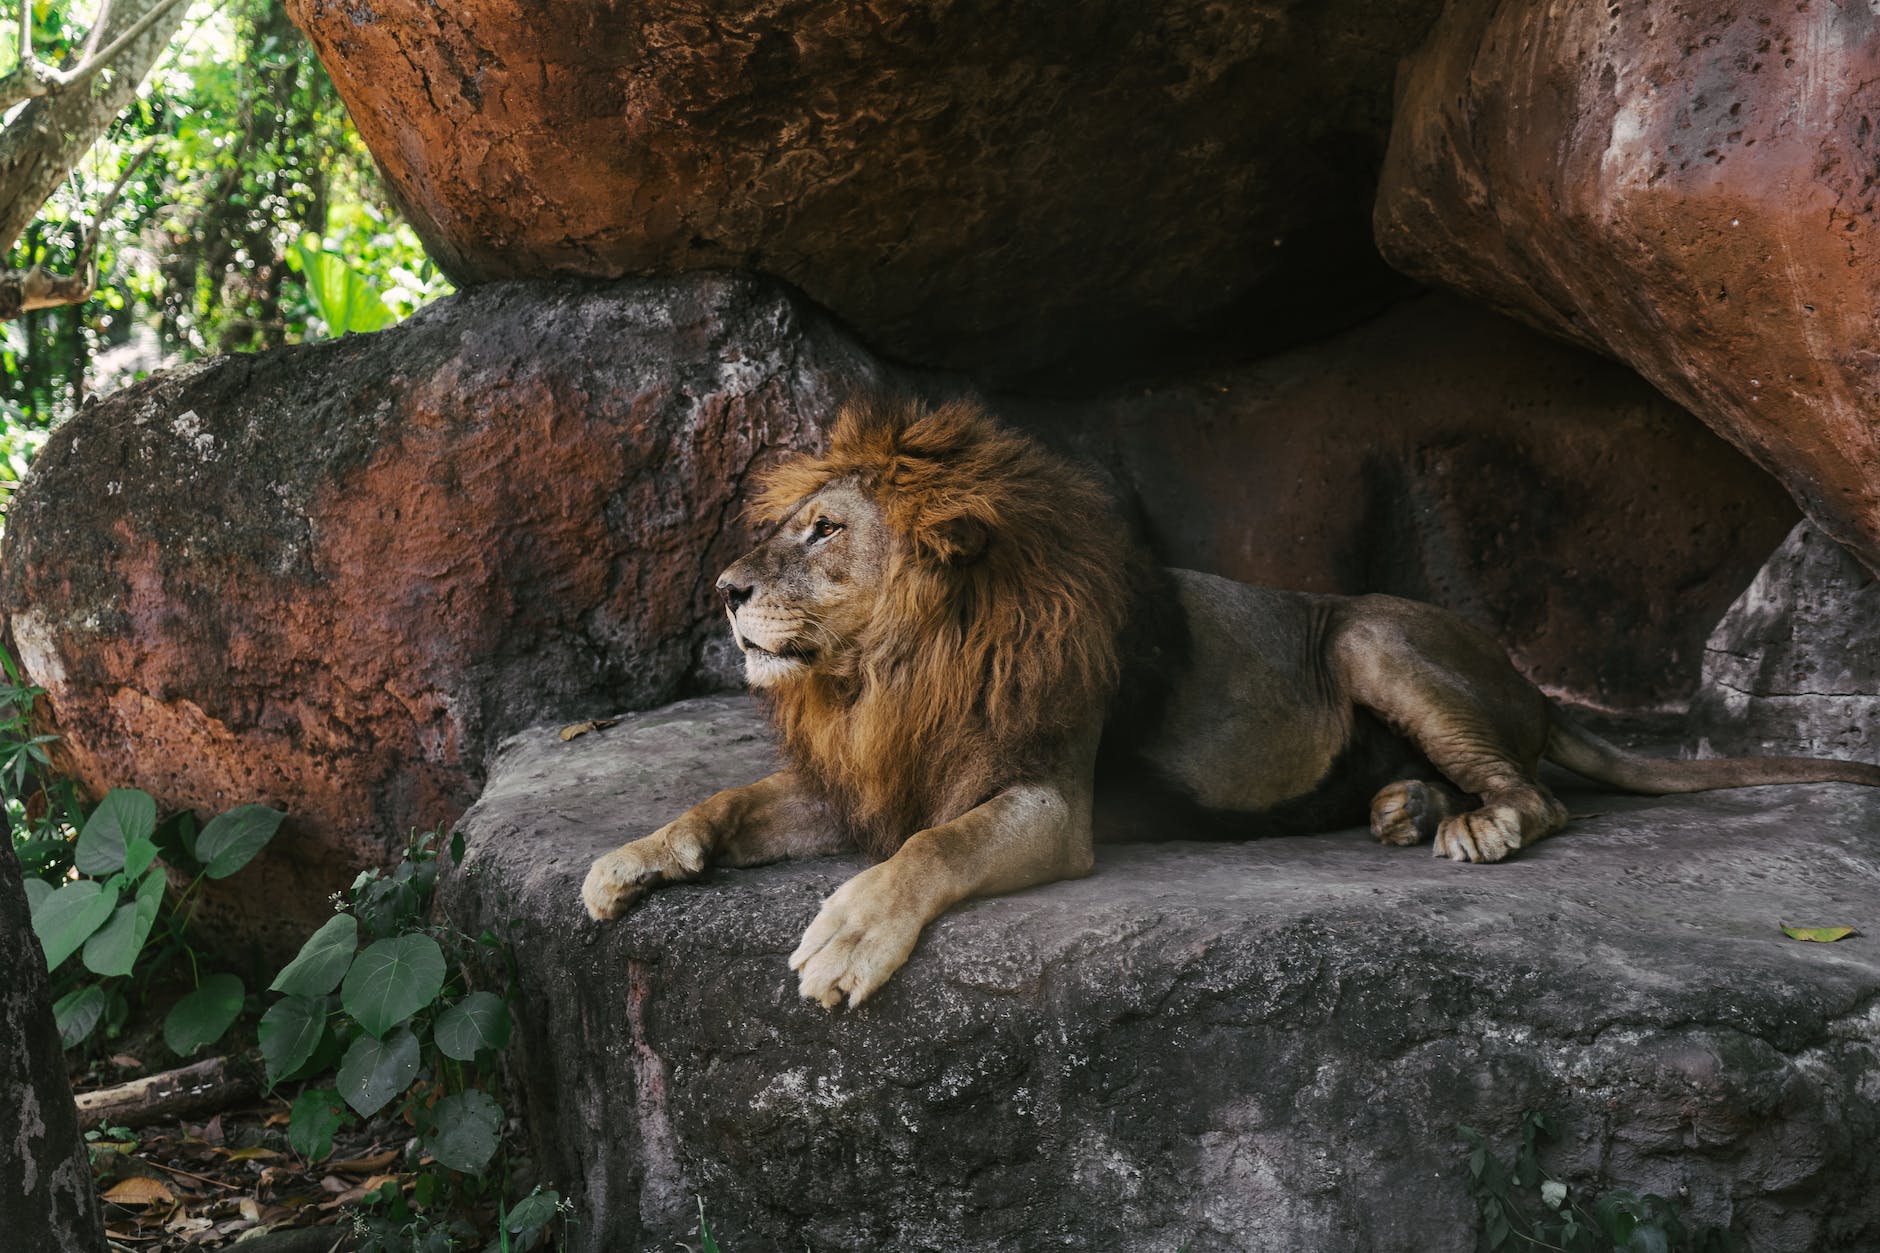 Zookeepers, Visitors, and Lions – Which One Are You?